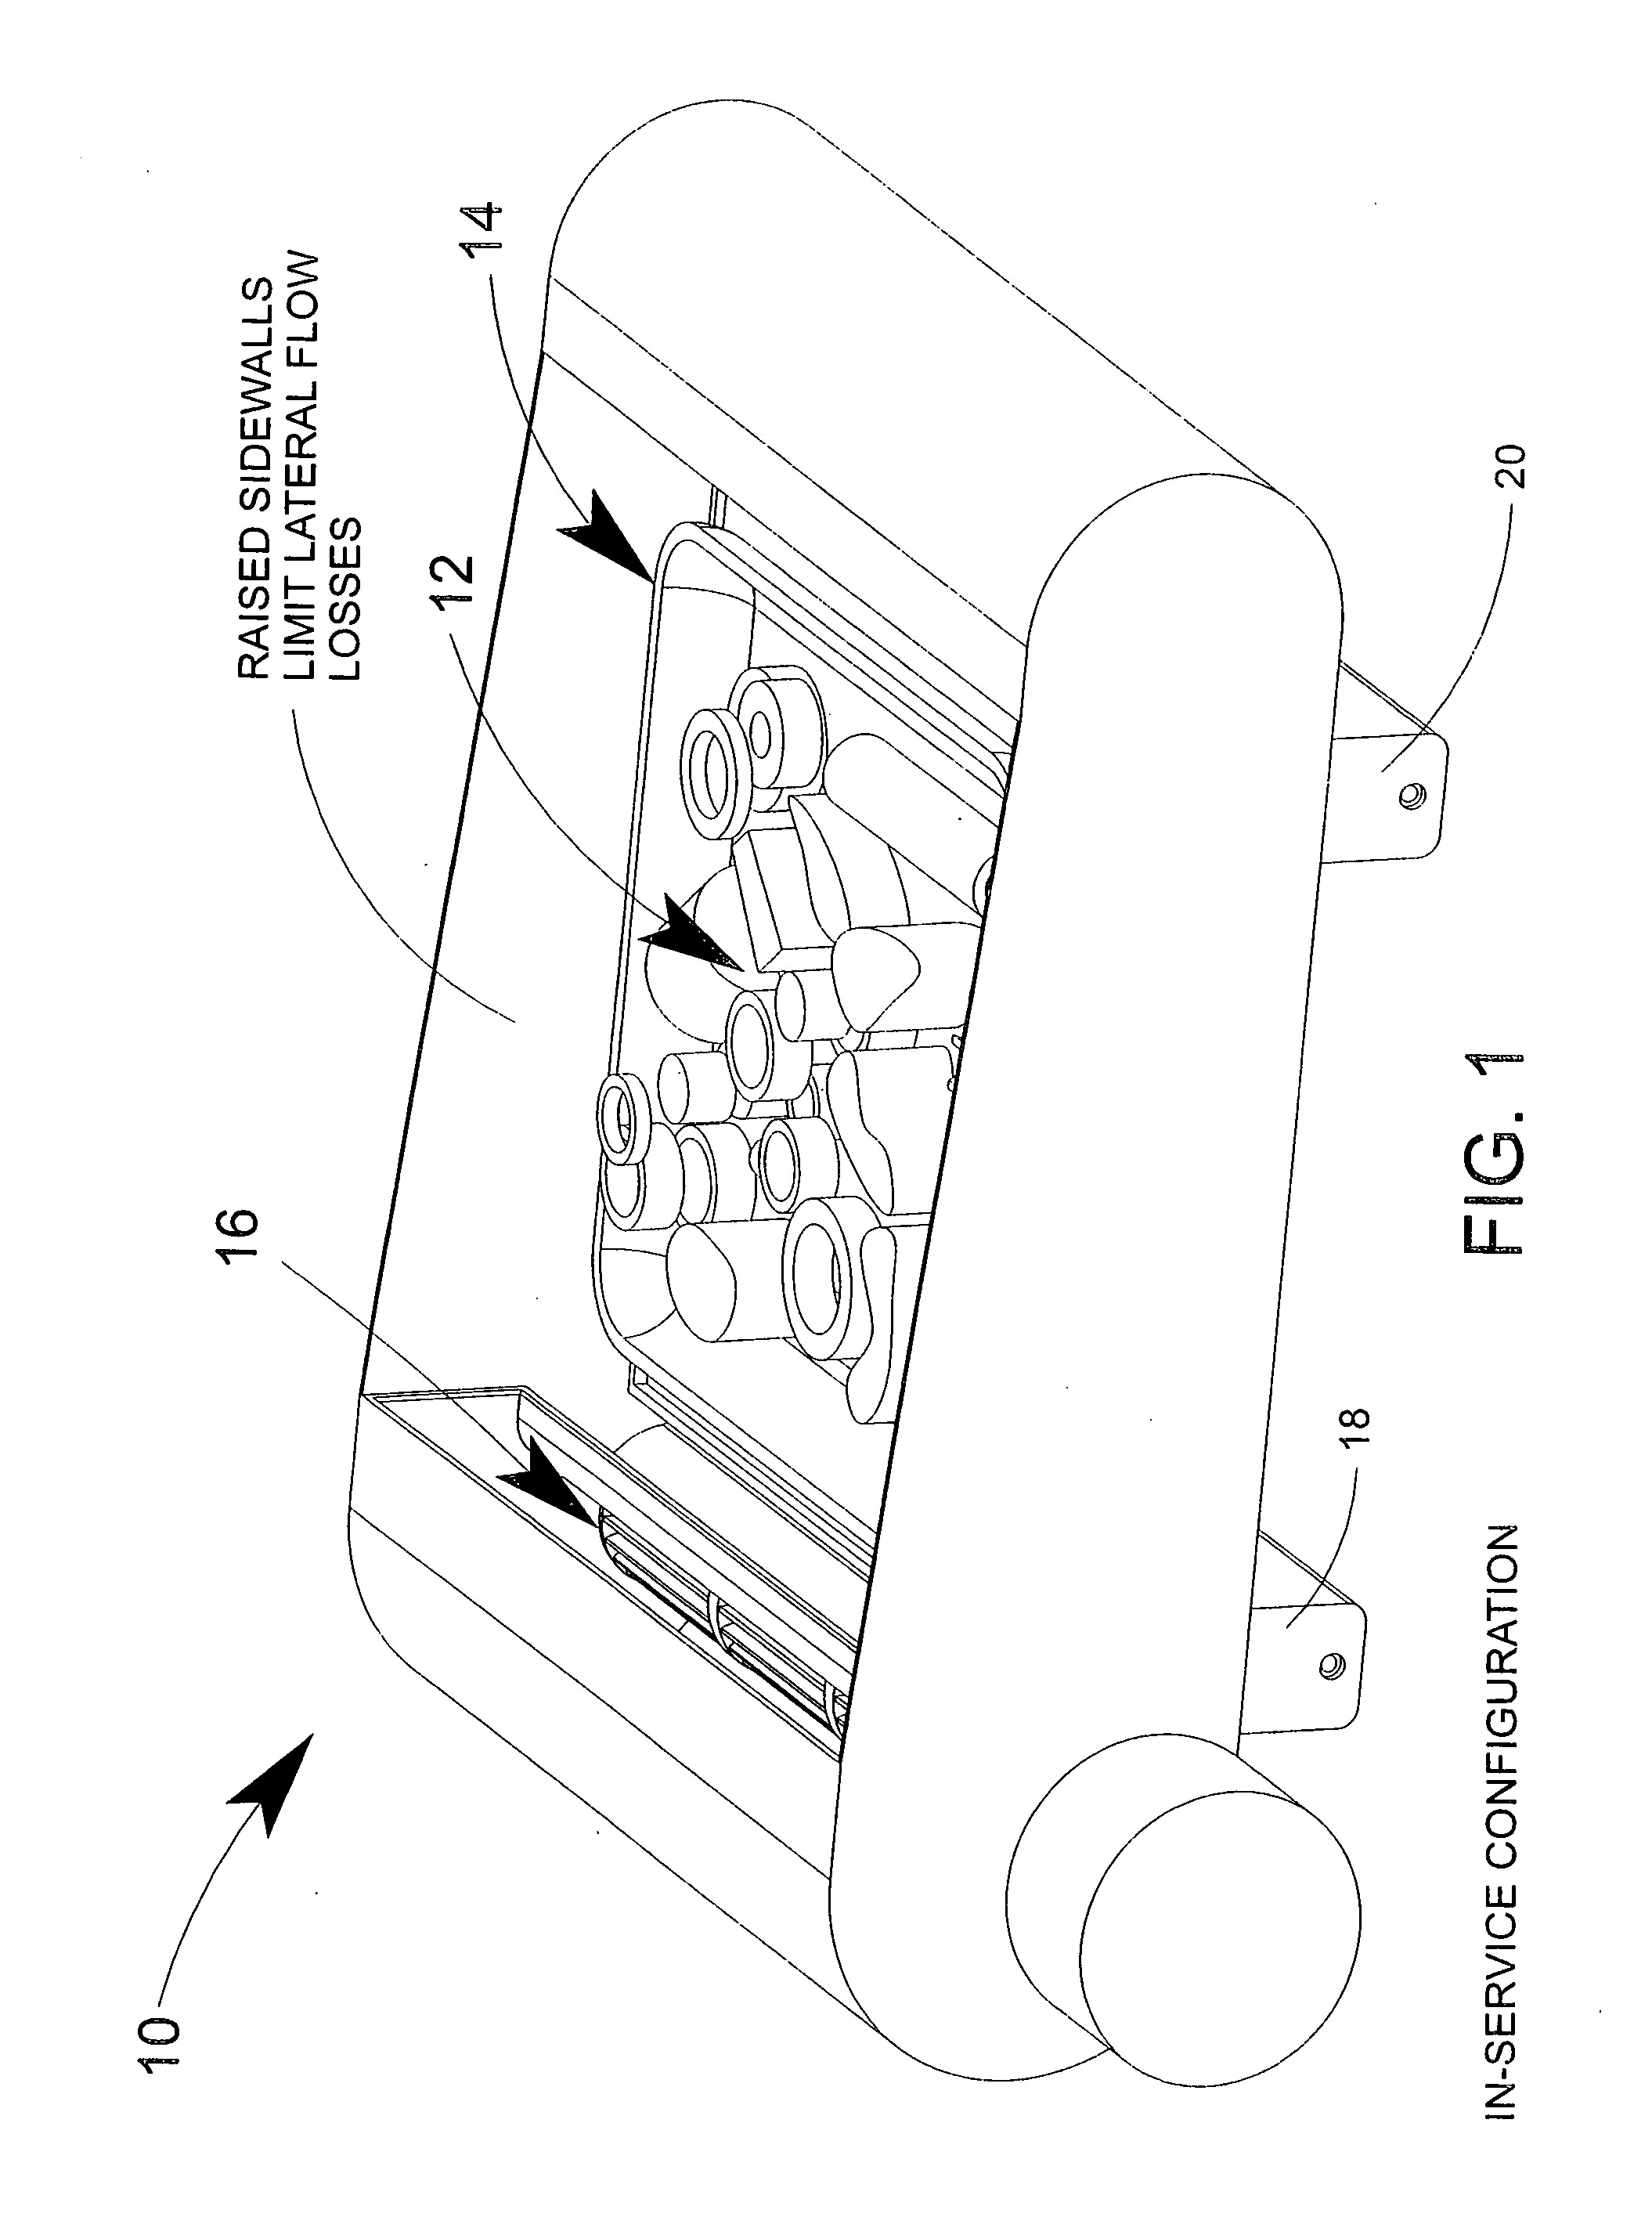 Apparatus and method for presenting, serving and protecting food and beverages